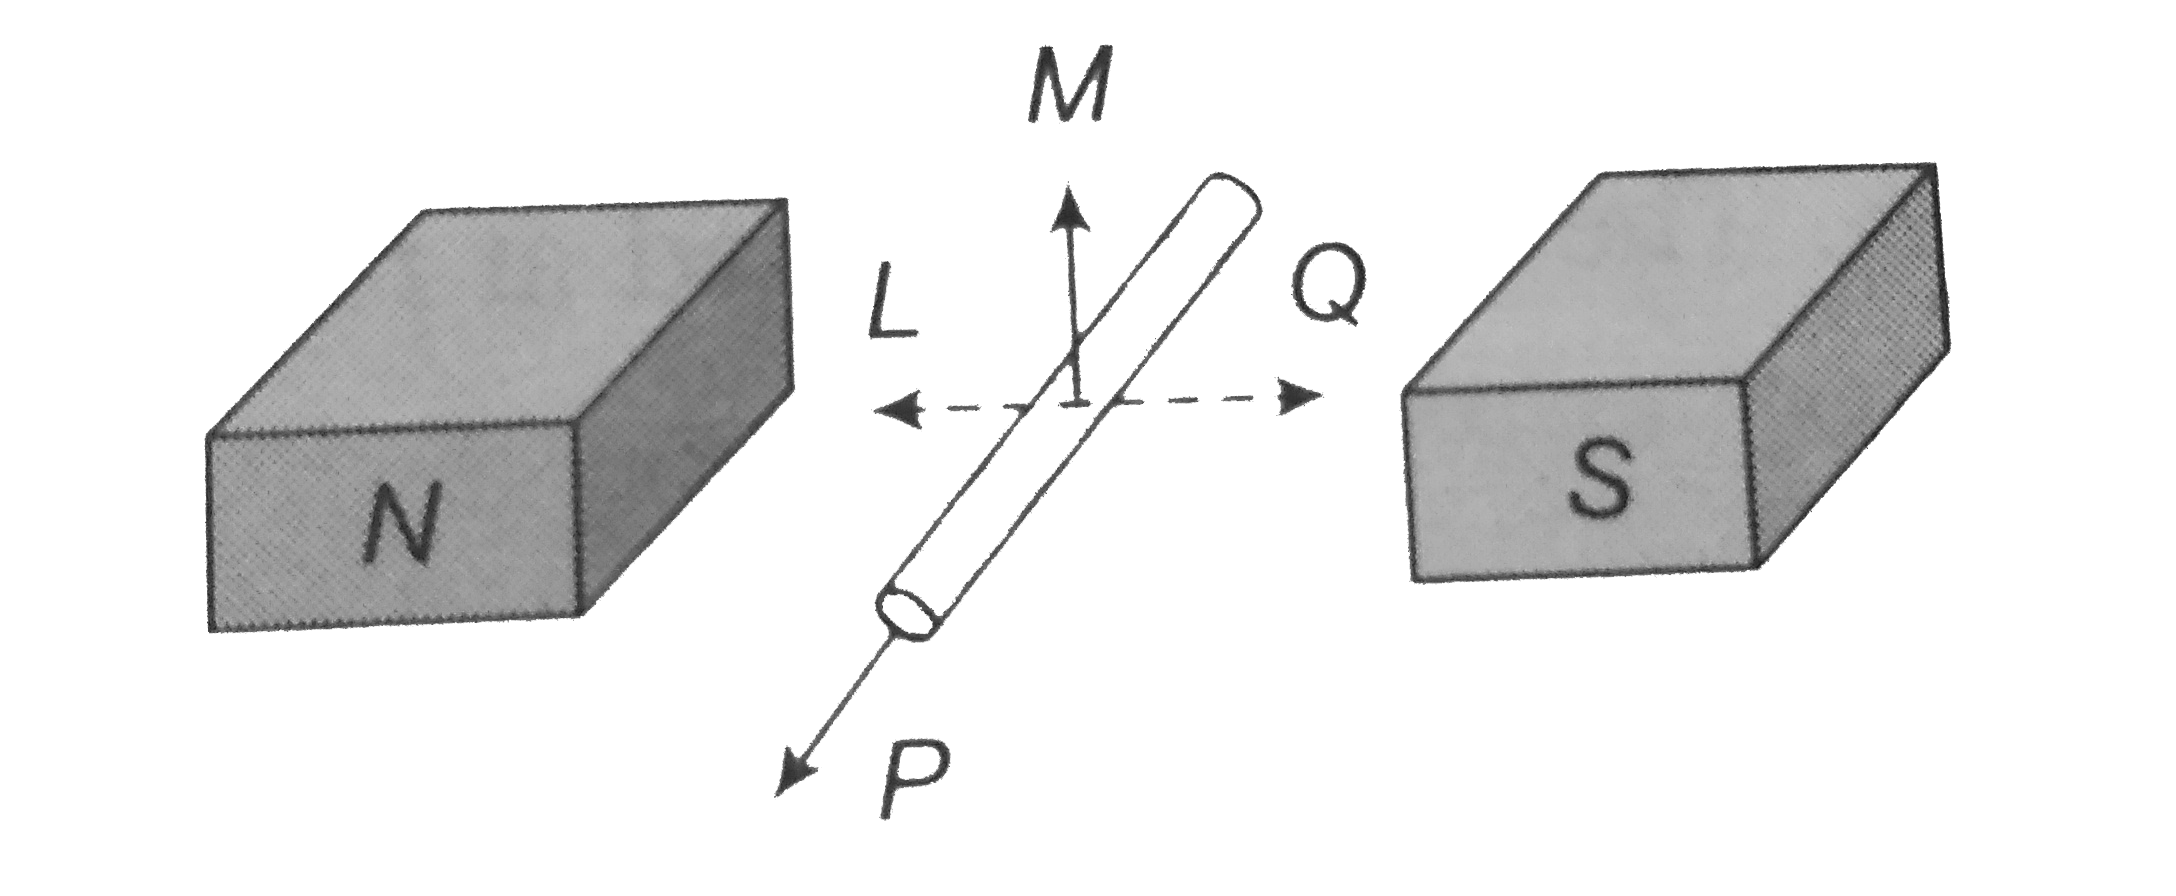 An electric potential difference will be induced between the ends of the conductor shown in the diagram, when the conductor moves in the direction